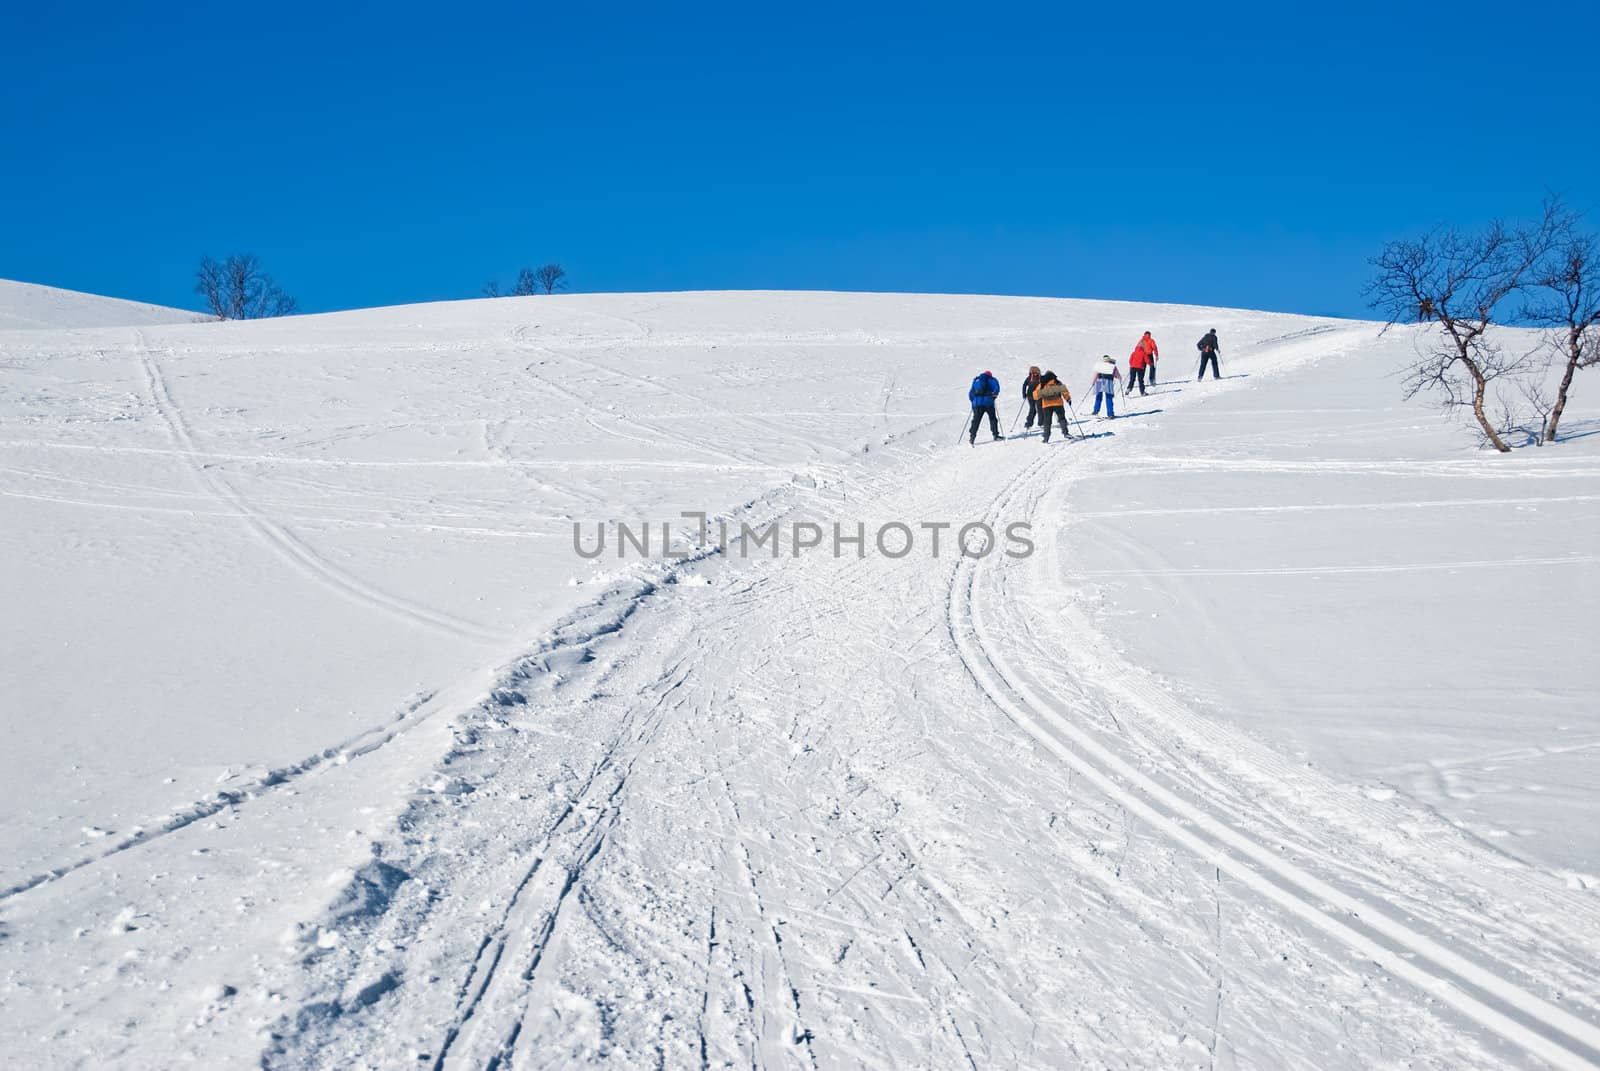 Group of people back country skiing up a hill. Picture taken in Oppdal, Norway.